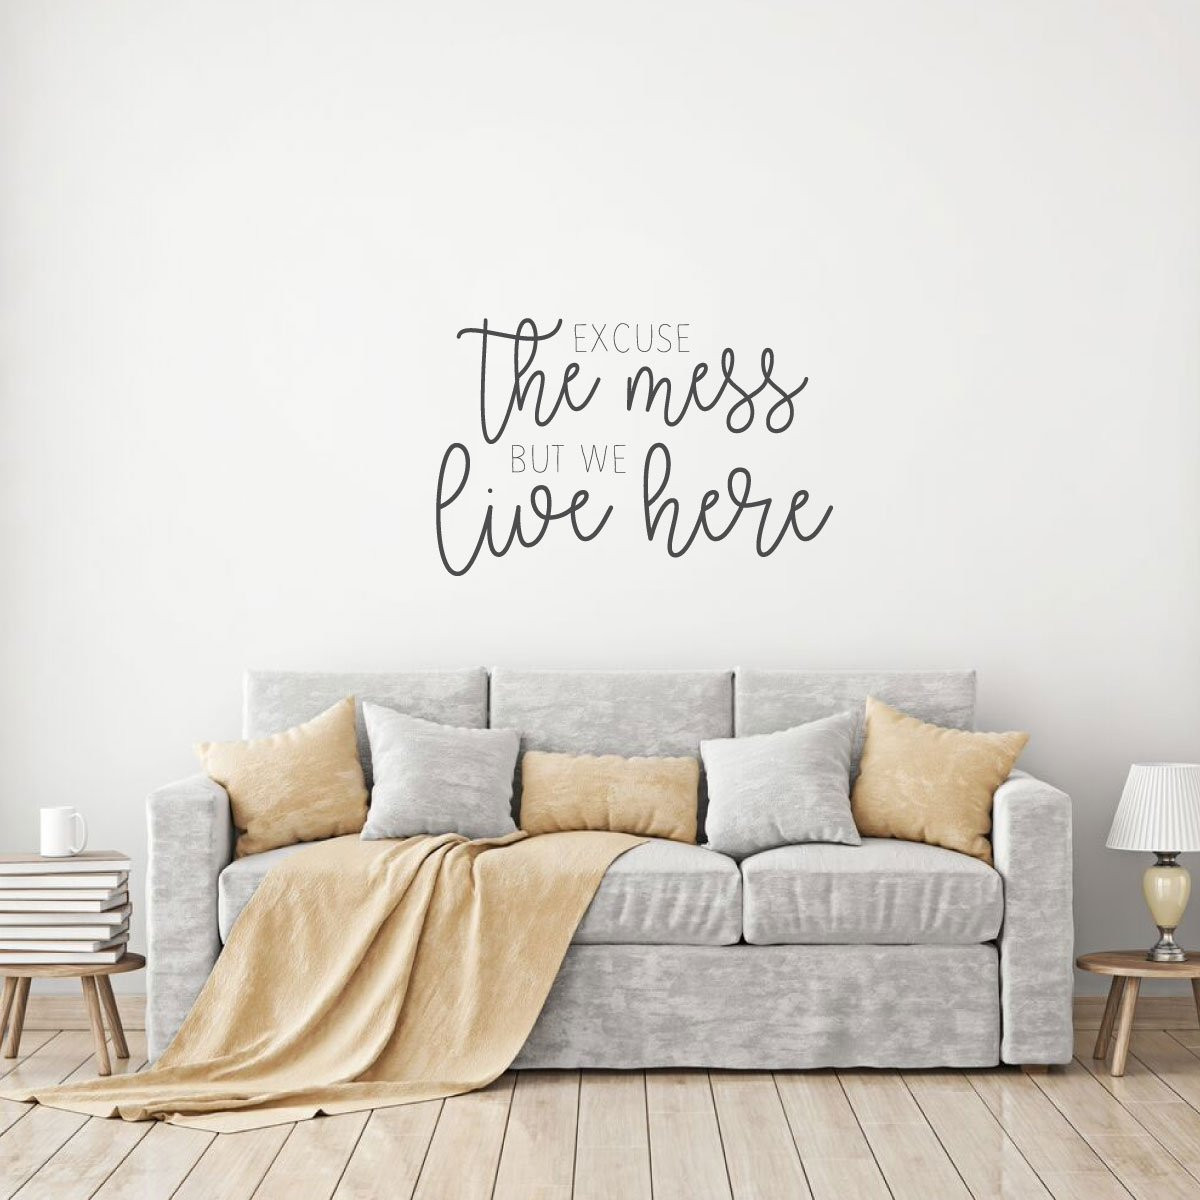 Wall Quotes For Living Room
 Excuse the Mess Quote for Living Room Vinyl Home Decor